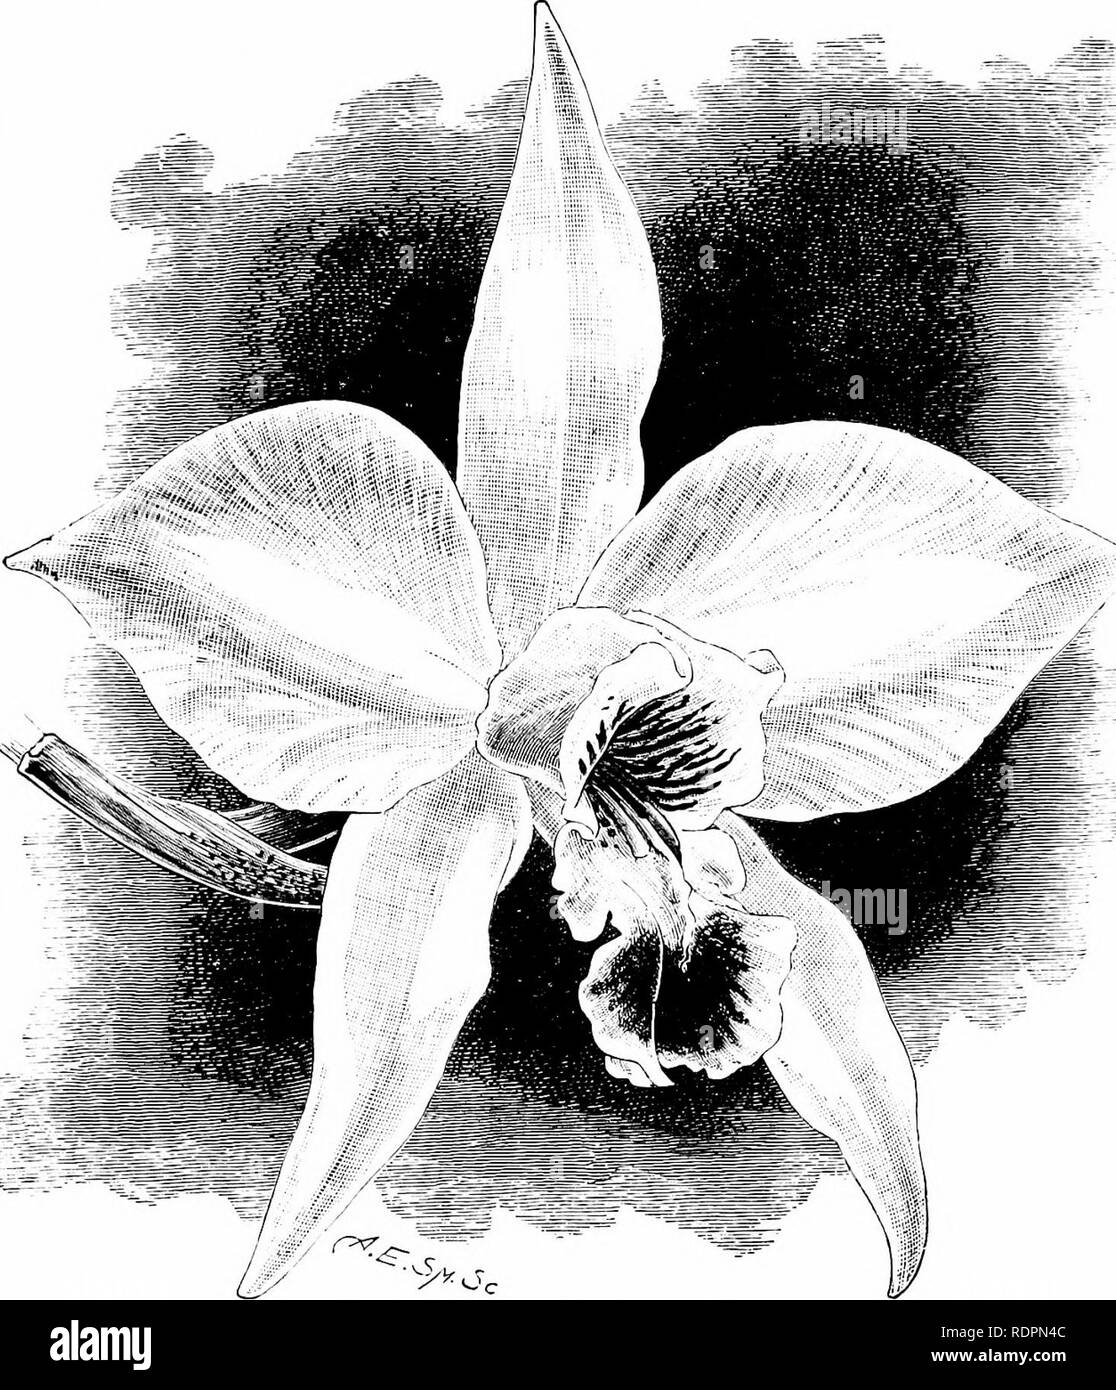 . The orchid-grower's manual, containing descriptions of the best species and varieties of orchidaceous plants in cultivation ... Orchids. LAELIA. 429 |iurple near the extremity, the whole Ijeiiig broadly margined with white.â Mexico: Juquila. Fig.â Warner, Sd. Orch. PL, ii. t. 34 ; Omhid Alhum. i. t. 44 ; Floral Mag., t. 530 ,â Jrnnin/j.i, Orch., t. 6 ; fiard. ('kron., 3rd ser., 1887, i. p. 424, f. 82 ; Vi-Uch'.i Man. Orch. Pi!. ii. p. .58 ; Gardening Wiirld, i-x. p. 2'J5.. LAELIA ANCEPS DAWSONI. (From the Gardeners' Chronicle.) L. ANCEPS DELICATA, Hort.âA distinct and handsome form, with sca Stock Photo